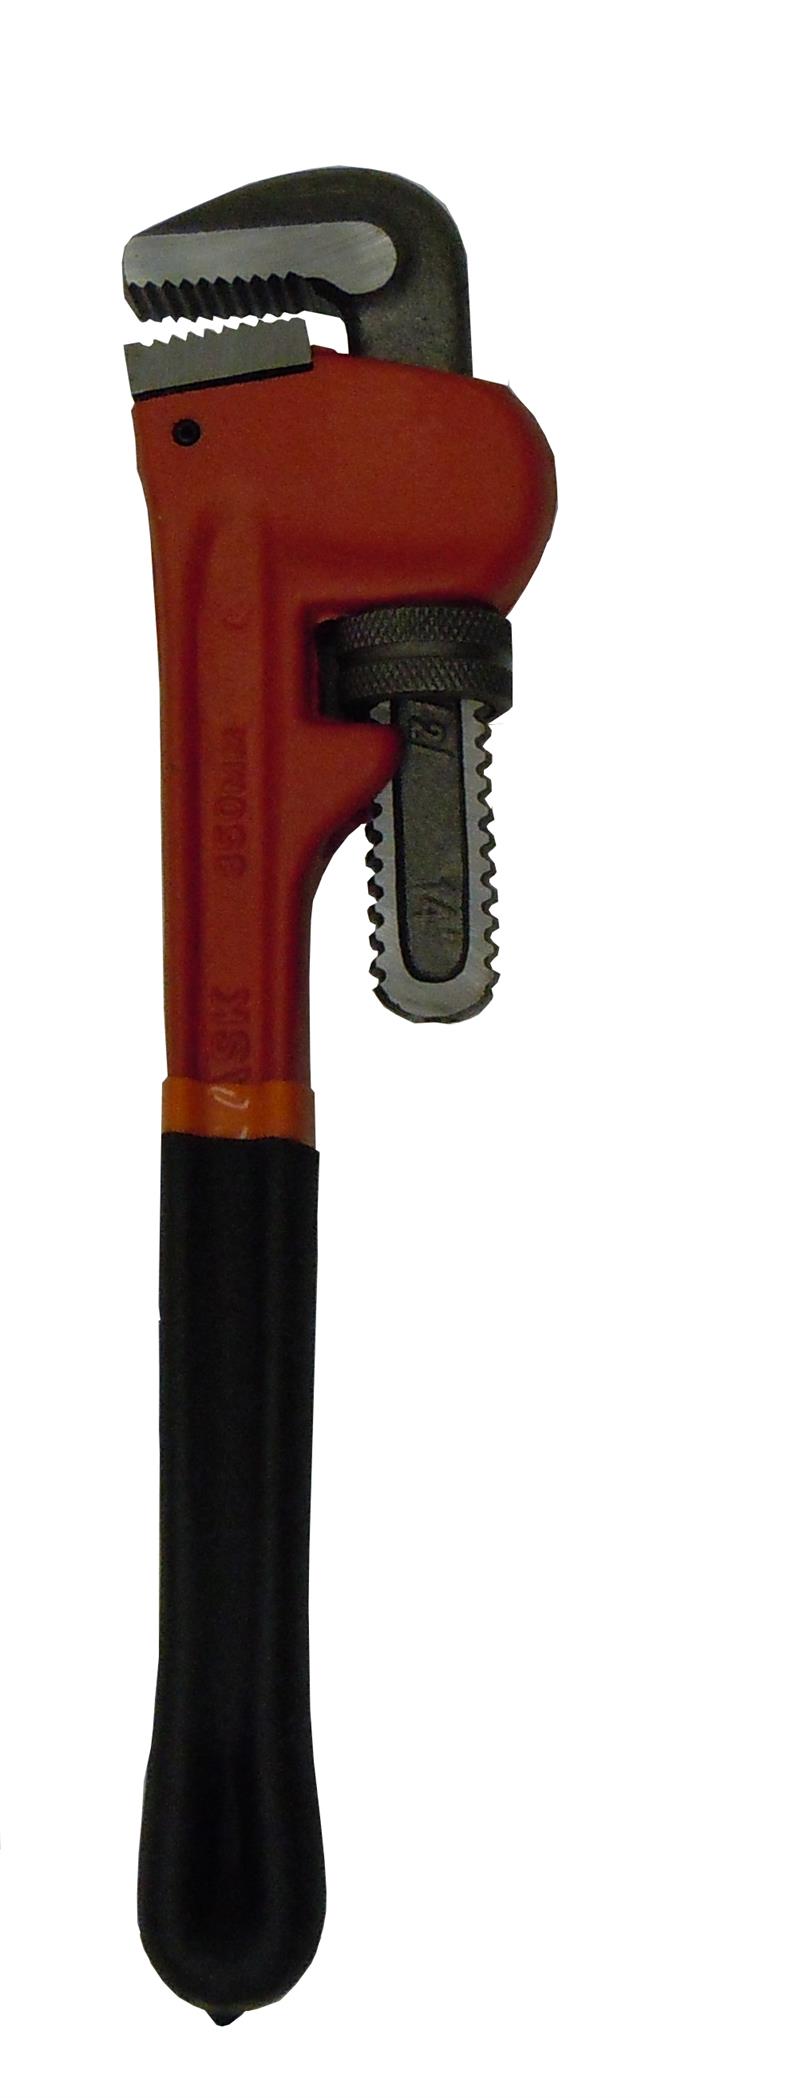 14 Heavy Duty PIPE Wrench with Coated Handle